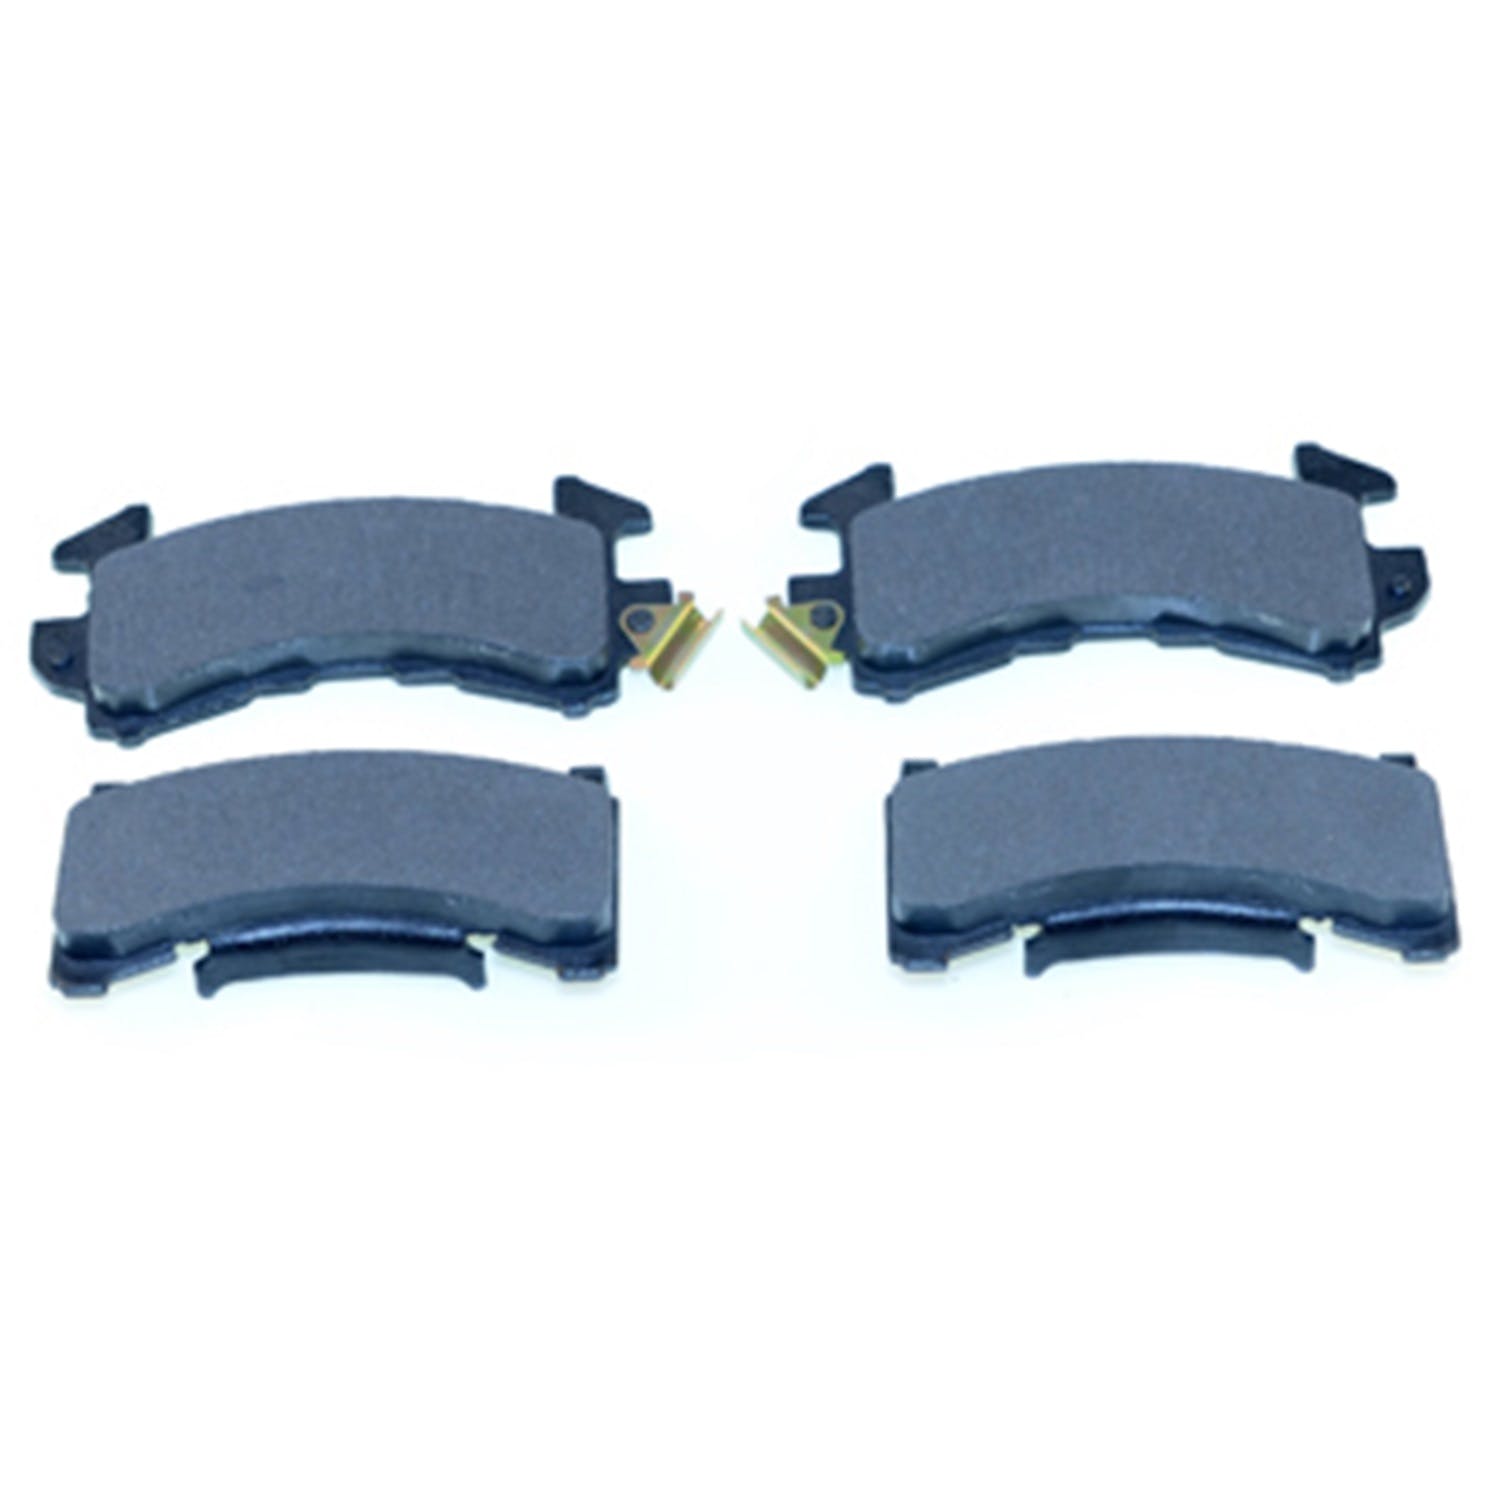 Stainless Steel Brakes 10113 Extreme Z Rated Brake Pads